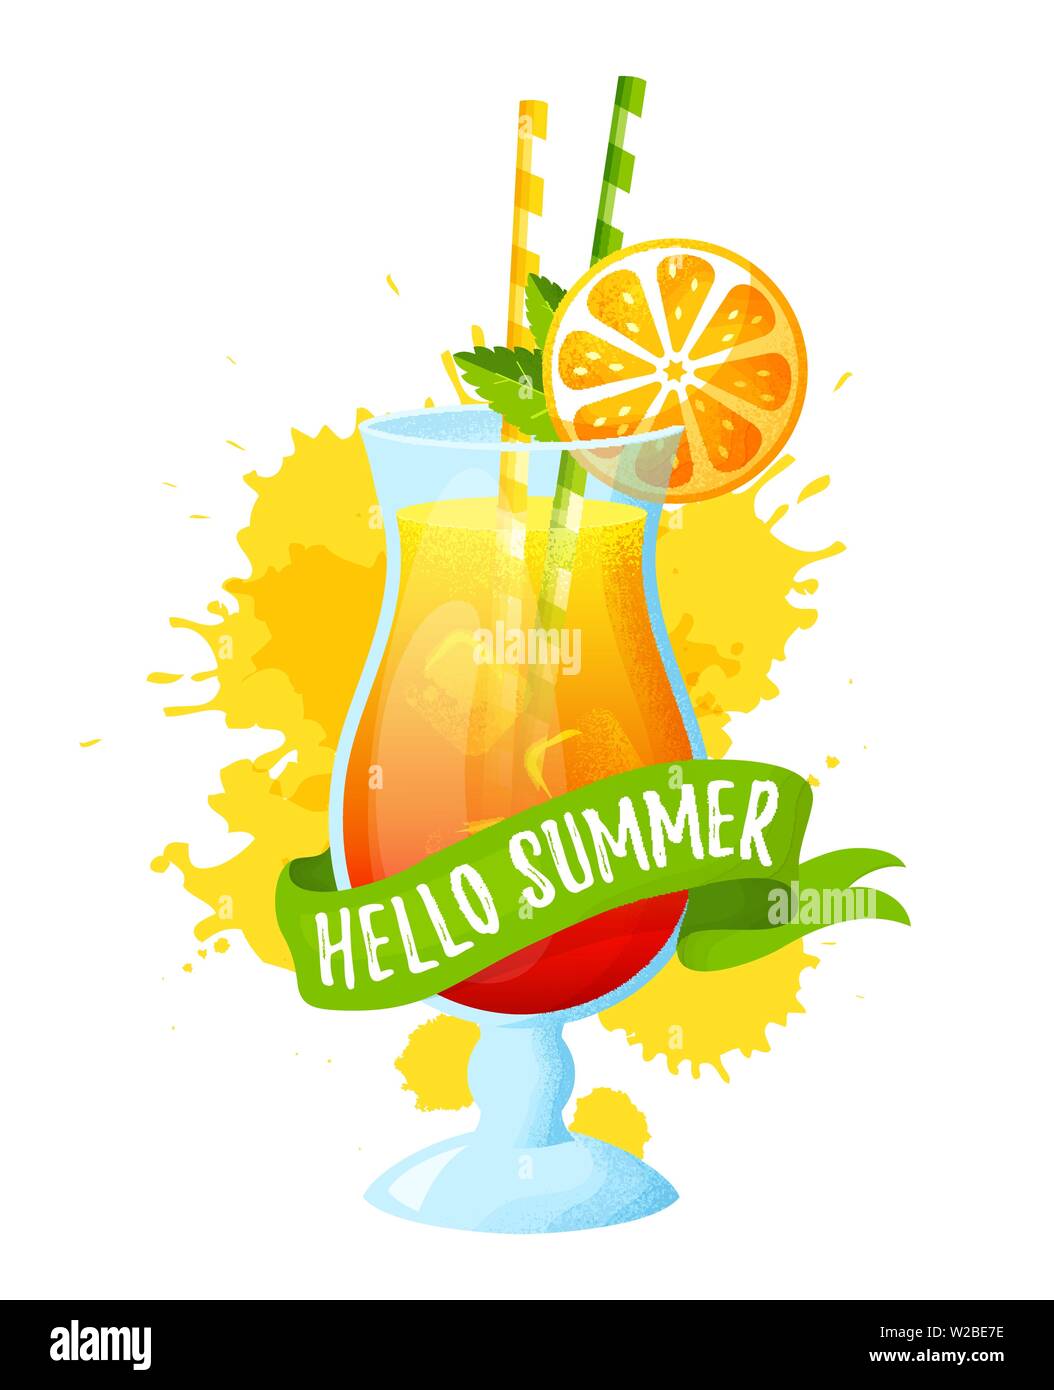 Hello summer! Tropical cocktail in glass. Vector illustration isolated on white background. Banner with refreshing drink, ribbon and juice splashes. Stock Vector